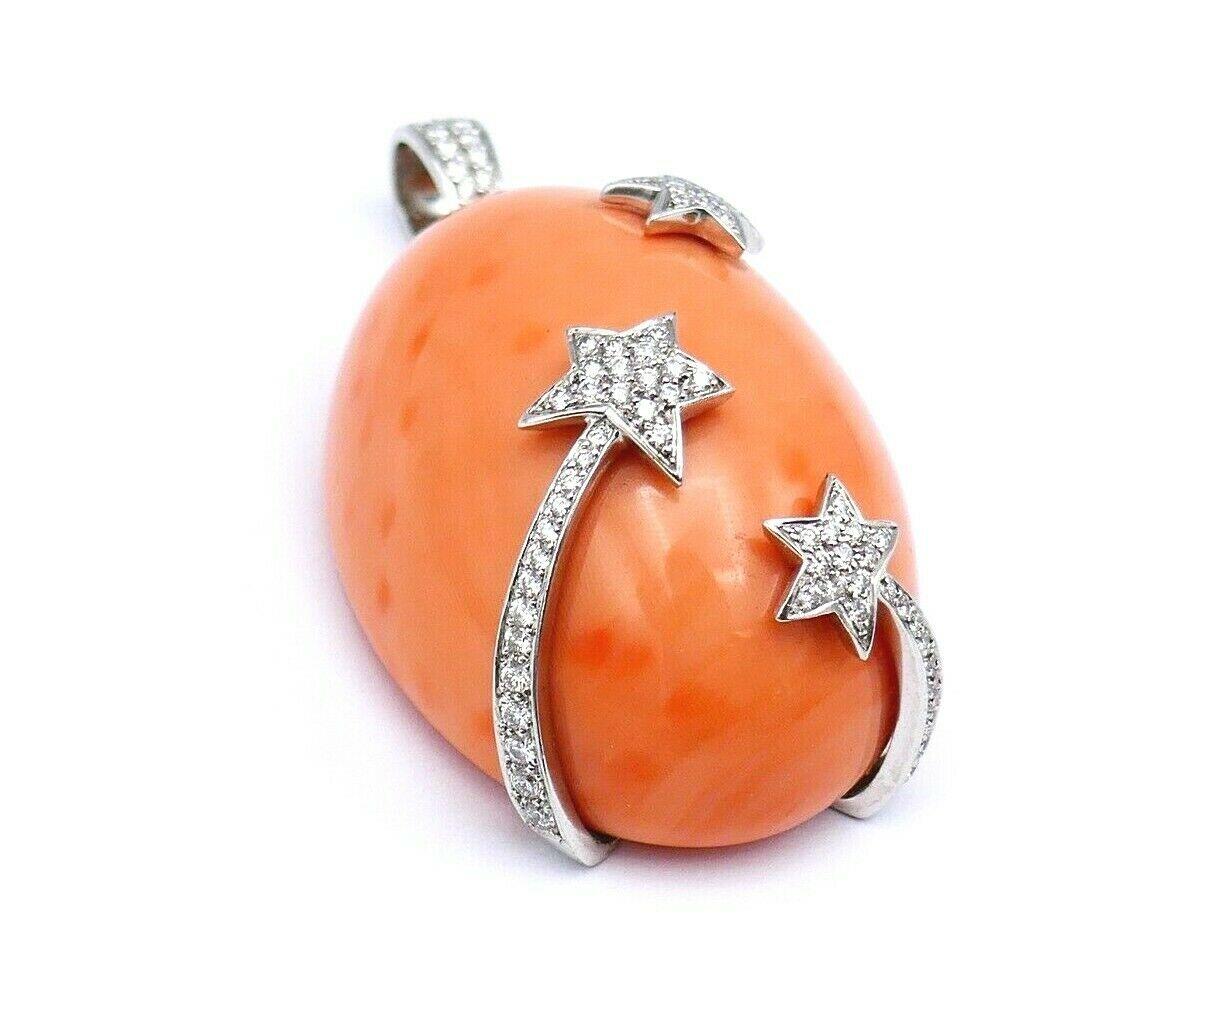 Beautiful chunky pendant with celestial motifs by Asprey. Made of coral and 18k white gold featuring 2.00 carats of brilliant cut diamond. 
Stamped with Asprey maker's marks and a hallmark for 18k gold. 
Measurements: 2,5